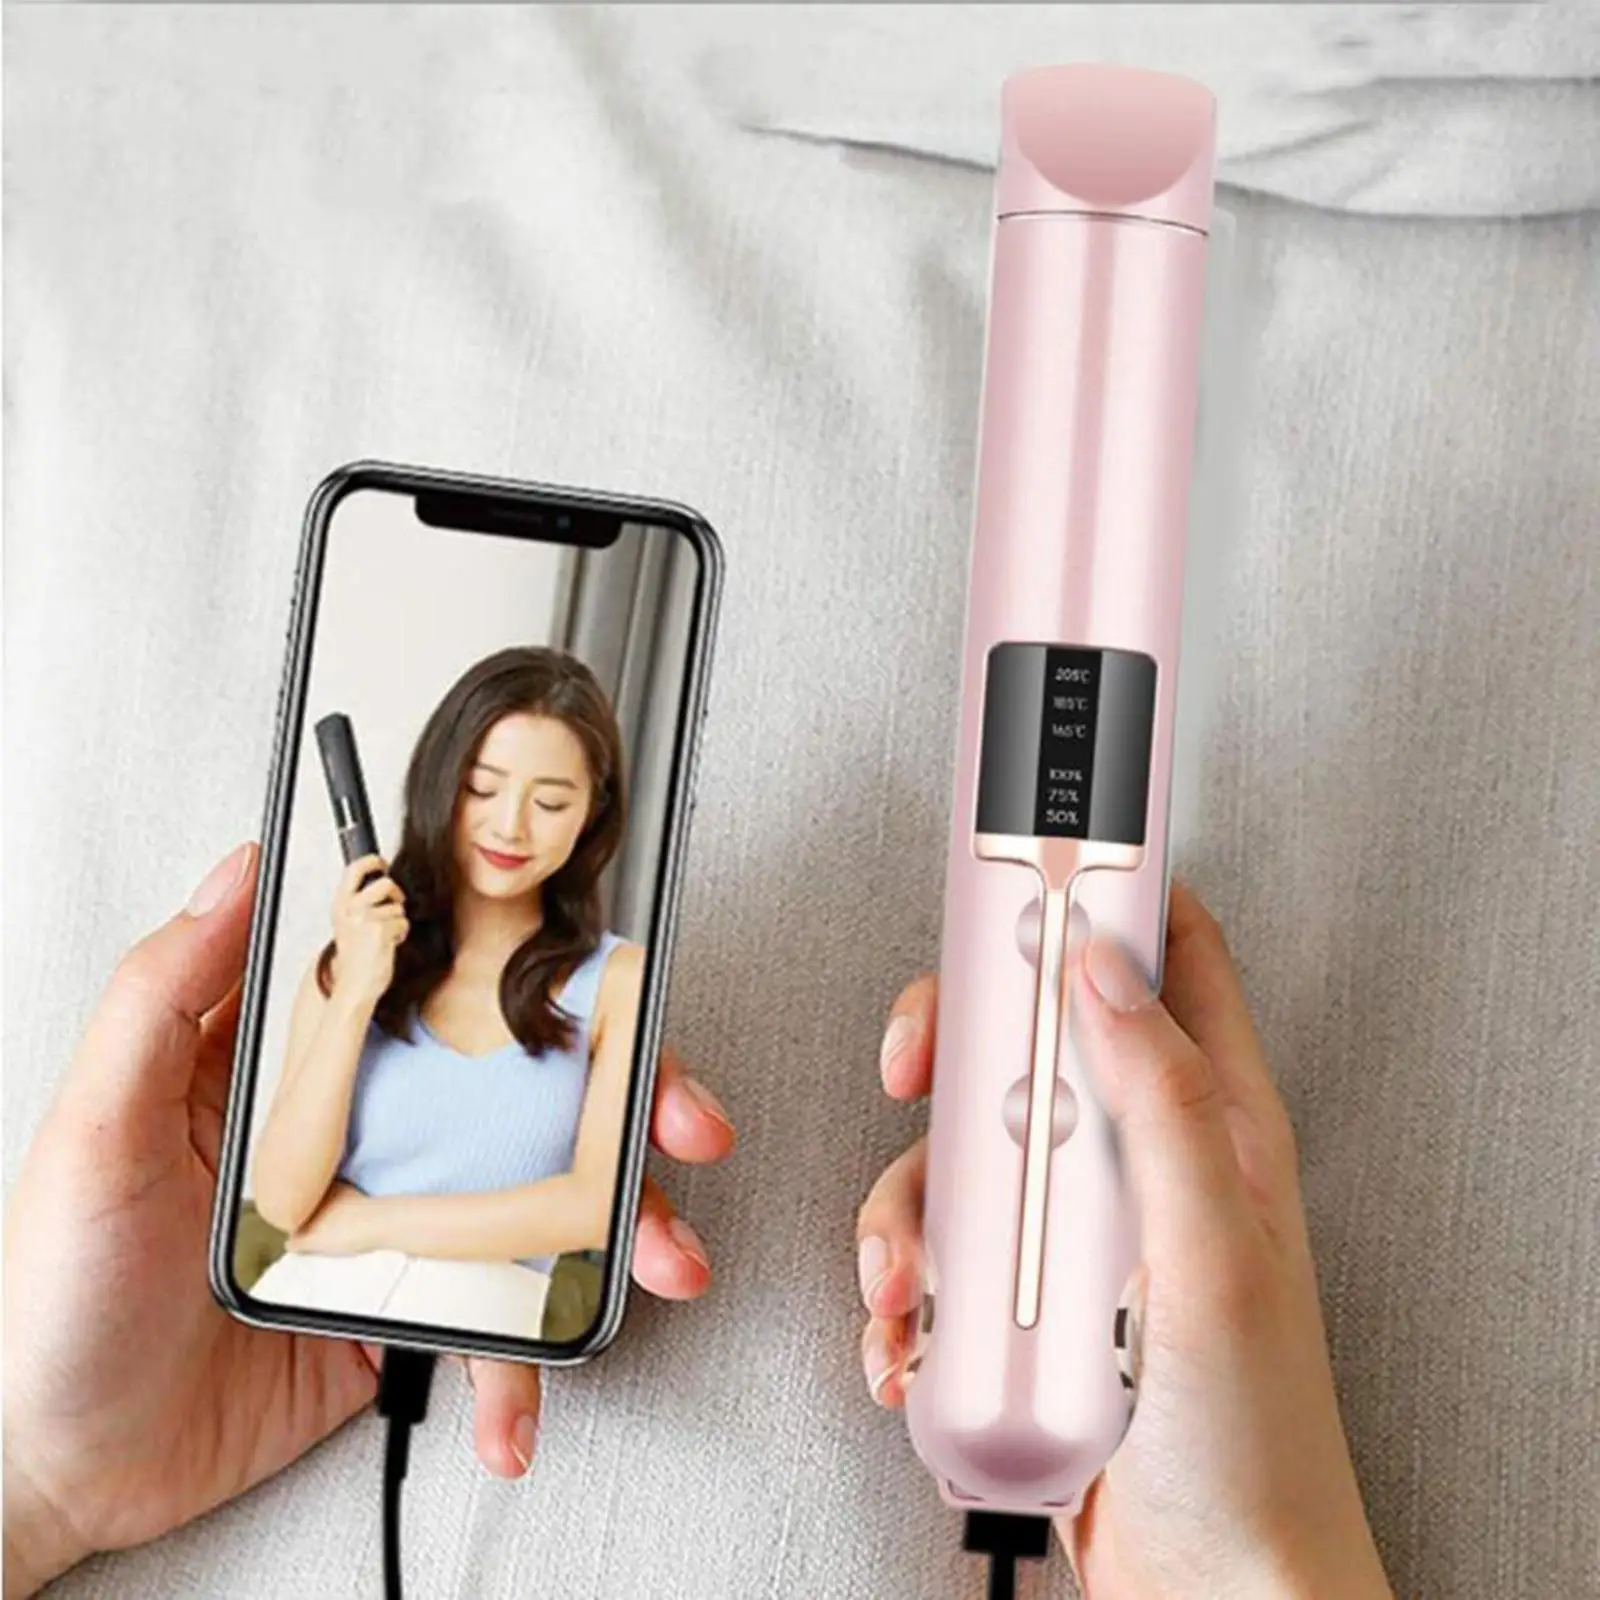 Compact Cordless Hair Curler Straightener 3 Temp USB Charging ABS Styling Tools for Salon Hair Straightening Home Curls Waves